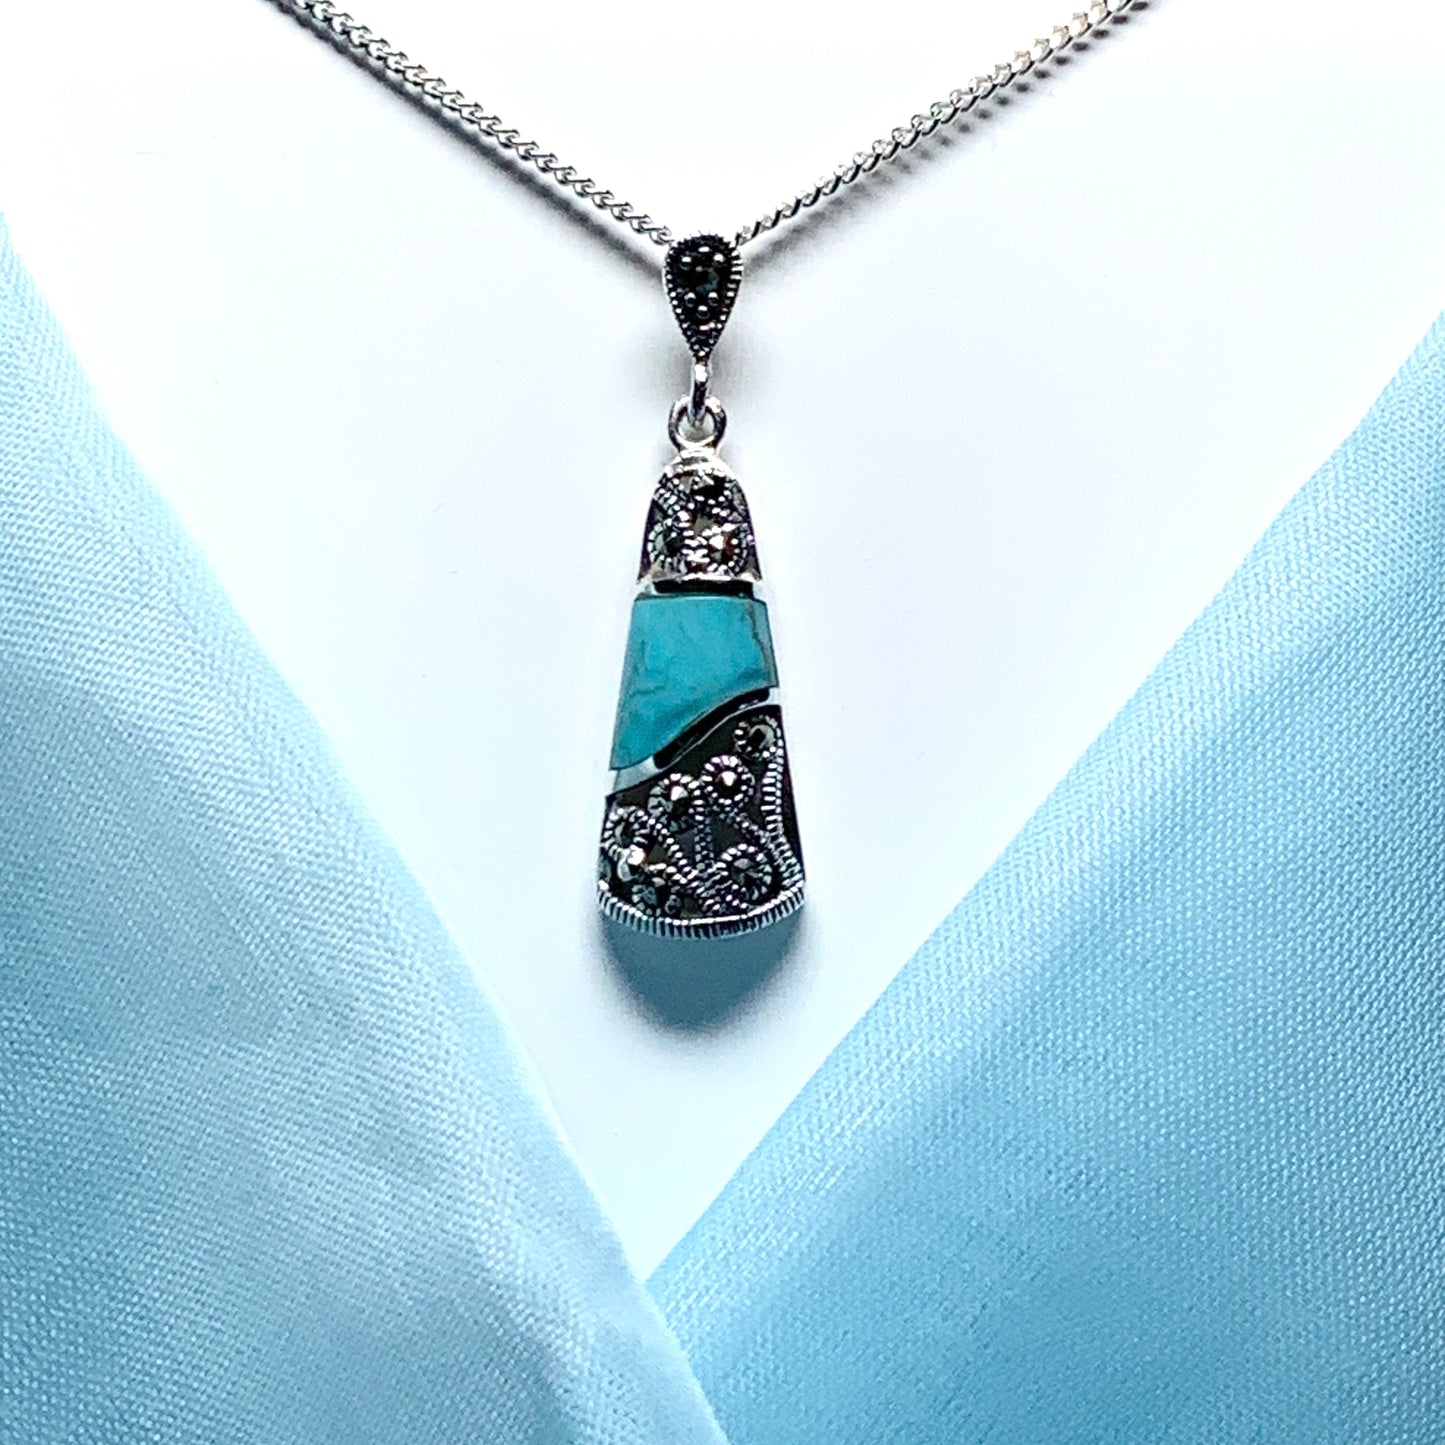 Fancy turquoise and marcasite drop sterling silver necklace pendant